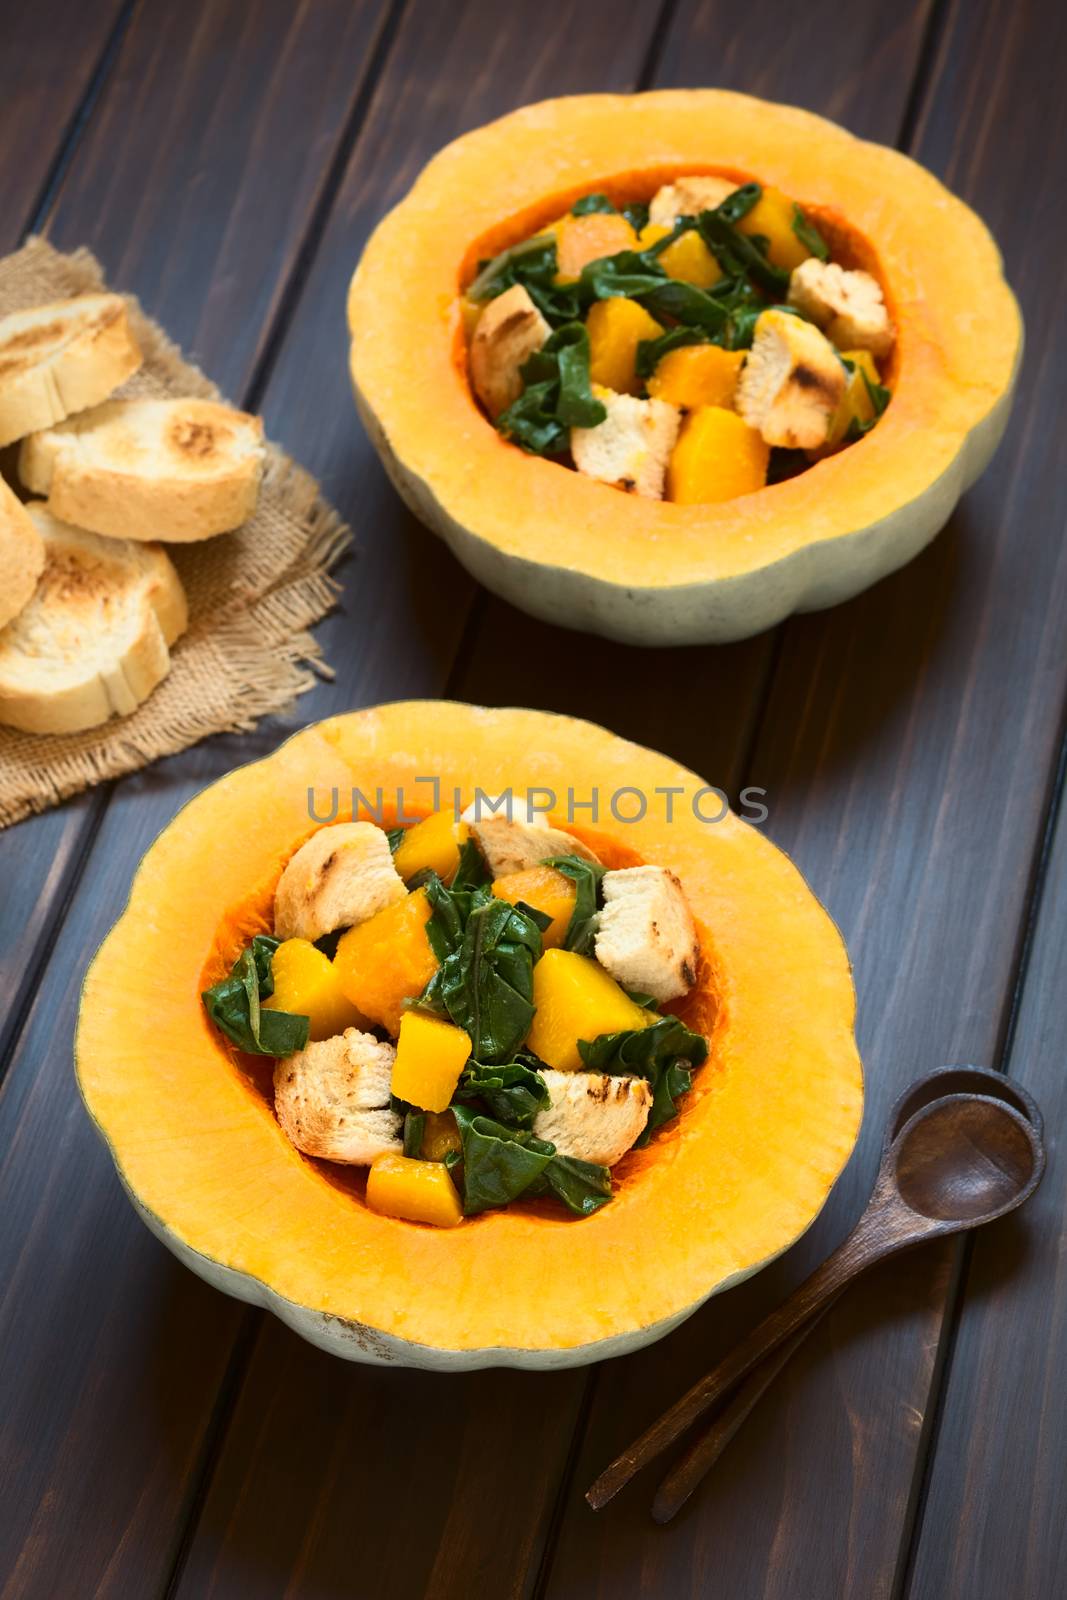 Pumpkin and chard salad with croutons served in pumpkin halves, photographed on dark wood with natural light (Selective Focus, Focus on the lower half of the first salad) 